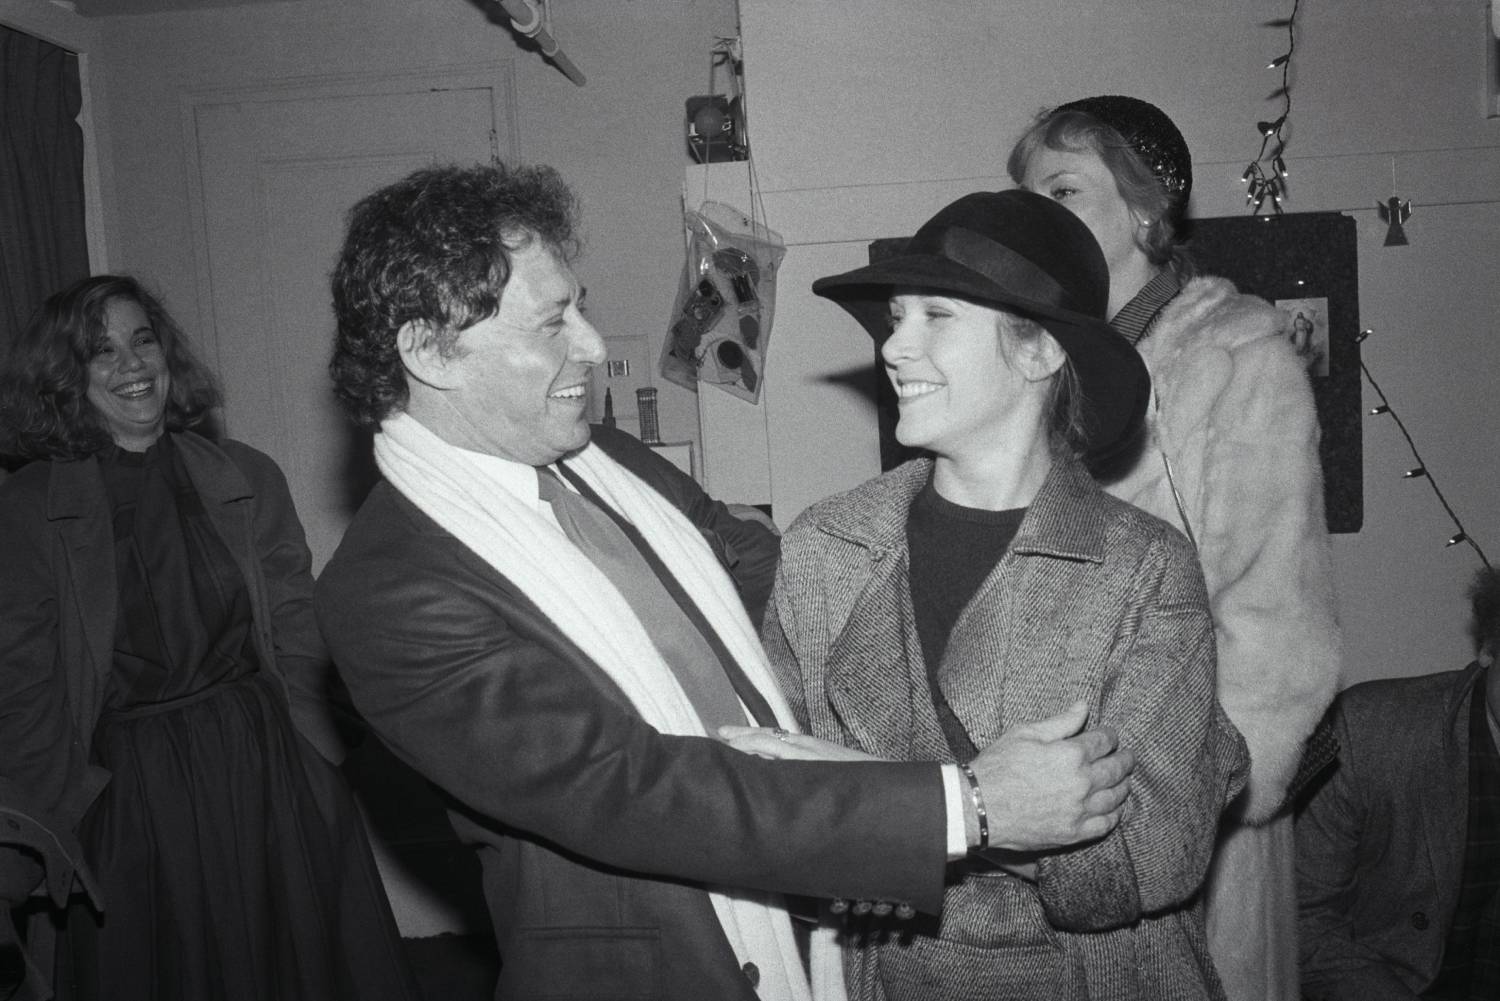 1/3/1983-New York, New York- Proud father Eddie Fisher, 54, greets his daughter Carrie, 26, backstage following her first performance in "Agnes of God." Carrie's mother, Debbie Reynolds, was also on hand but avoided being photographed with her former husband. Carrie replaced Amanda Plummer in the show. Miss Plummer won a Tony Award last season for her performance as the young nun.